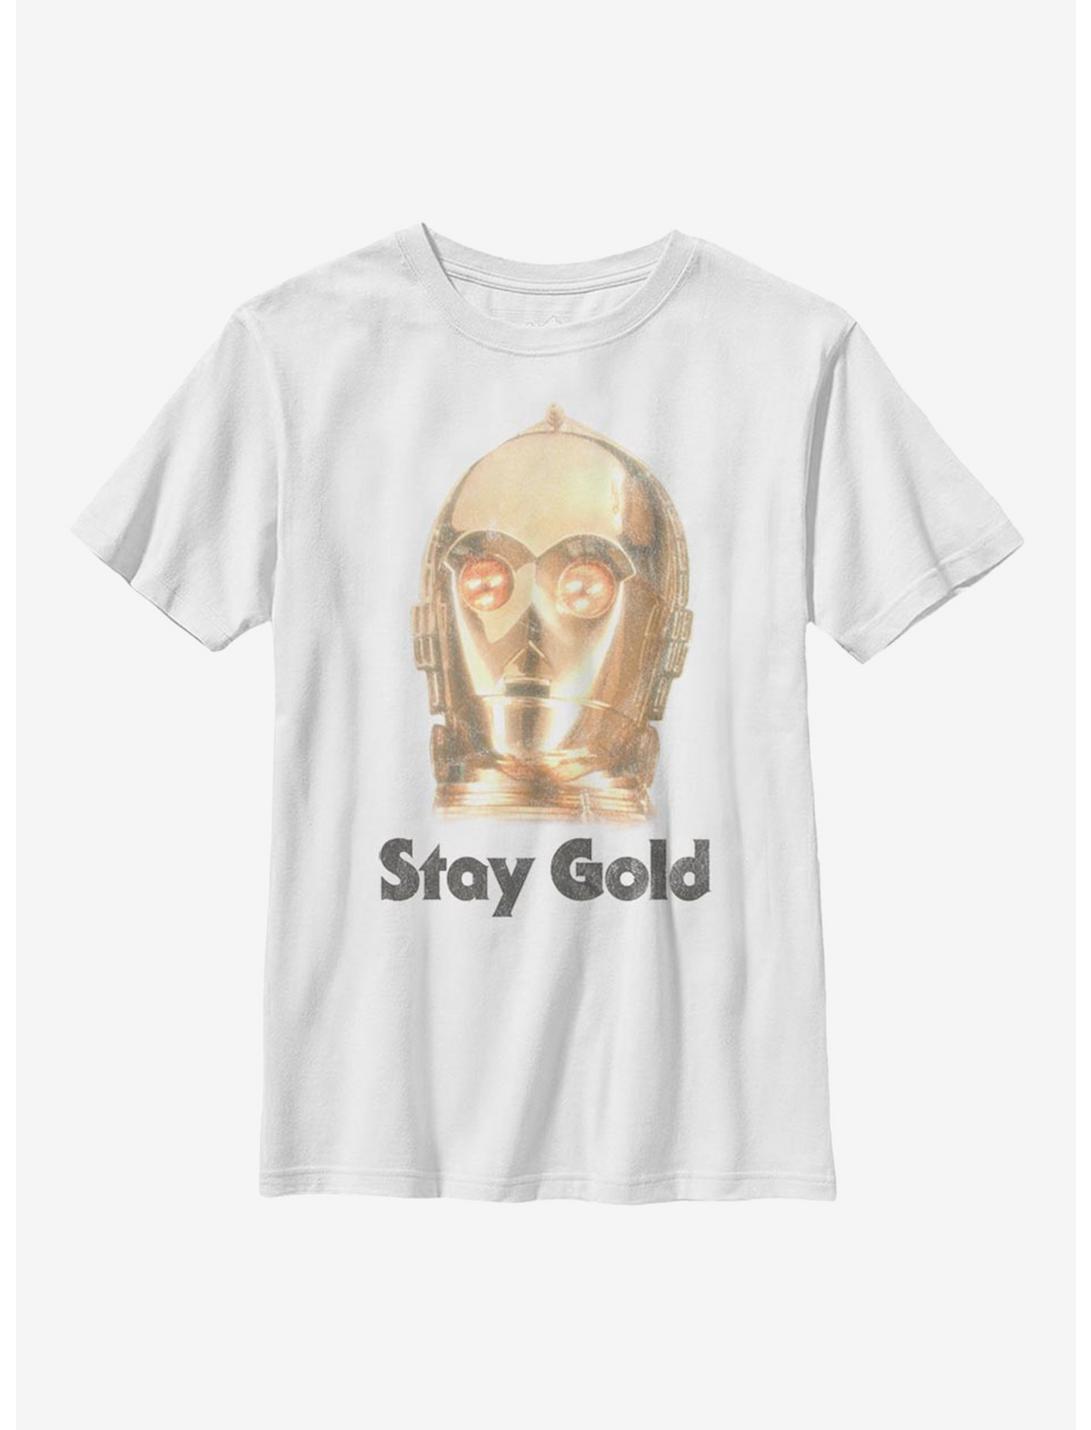 Star Wars Episode IX The Rise Of Skywalker Stay Gold Youth T-Shirt, WHITE, hi-res